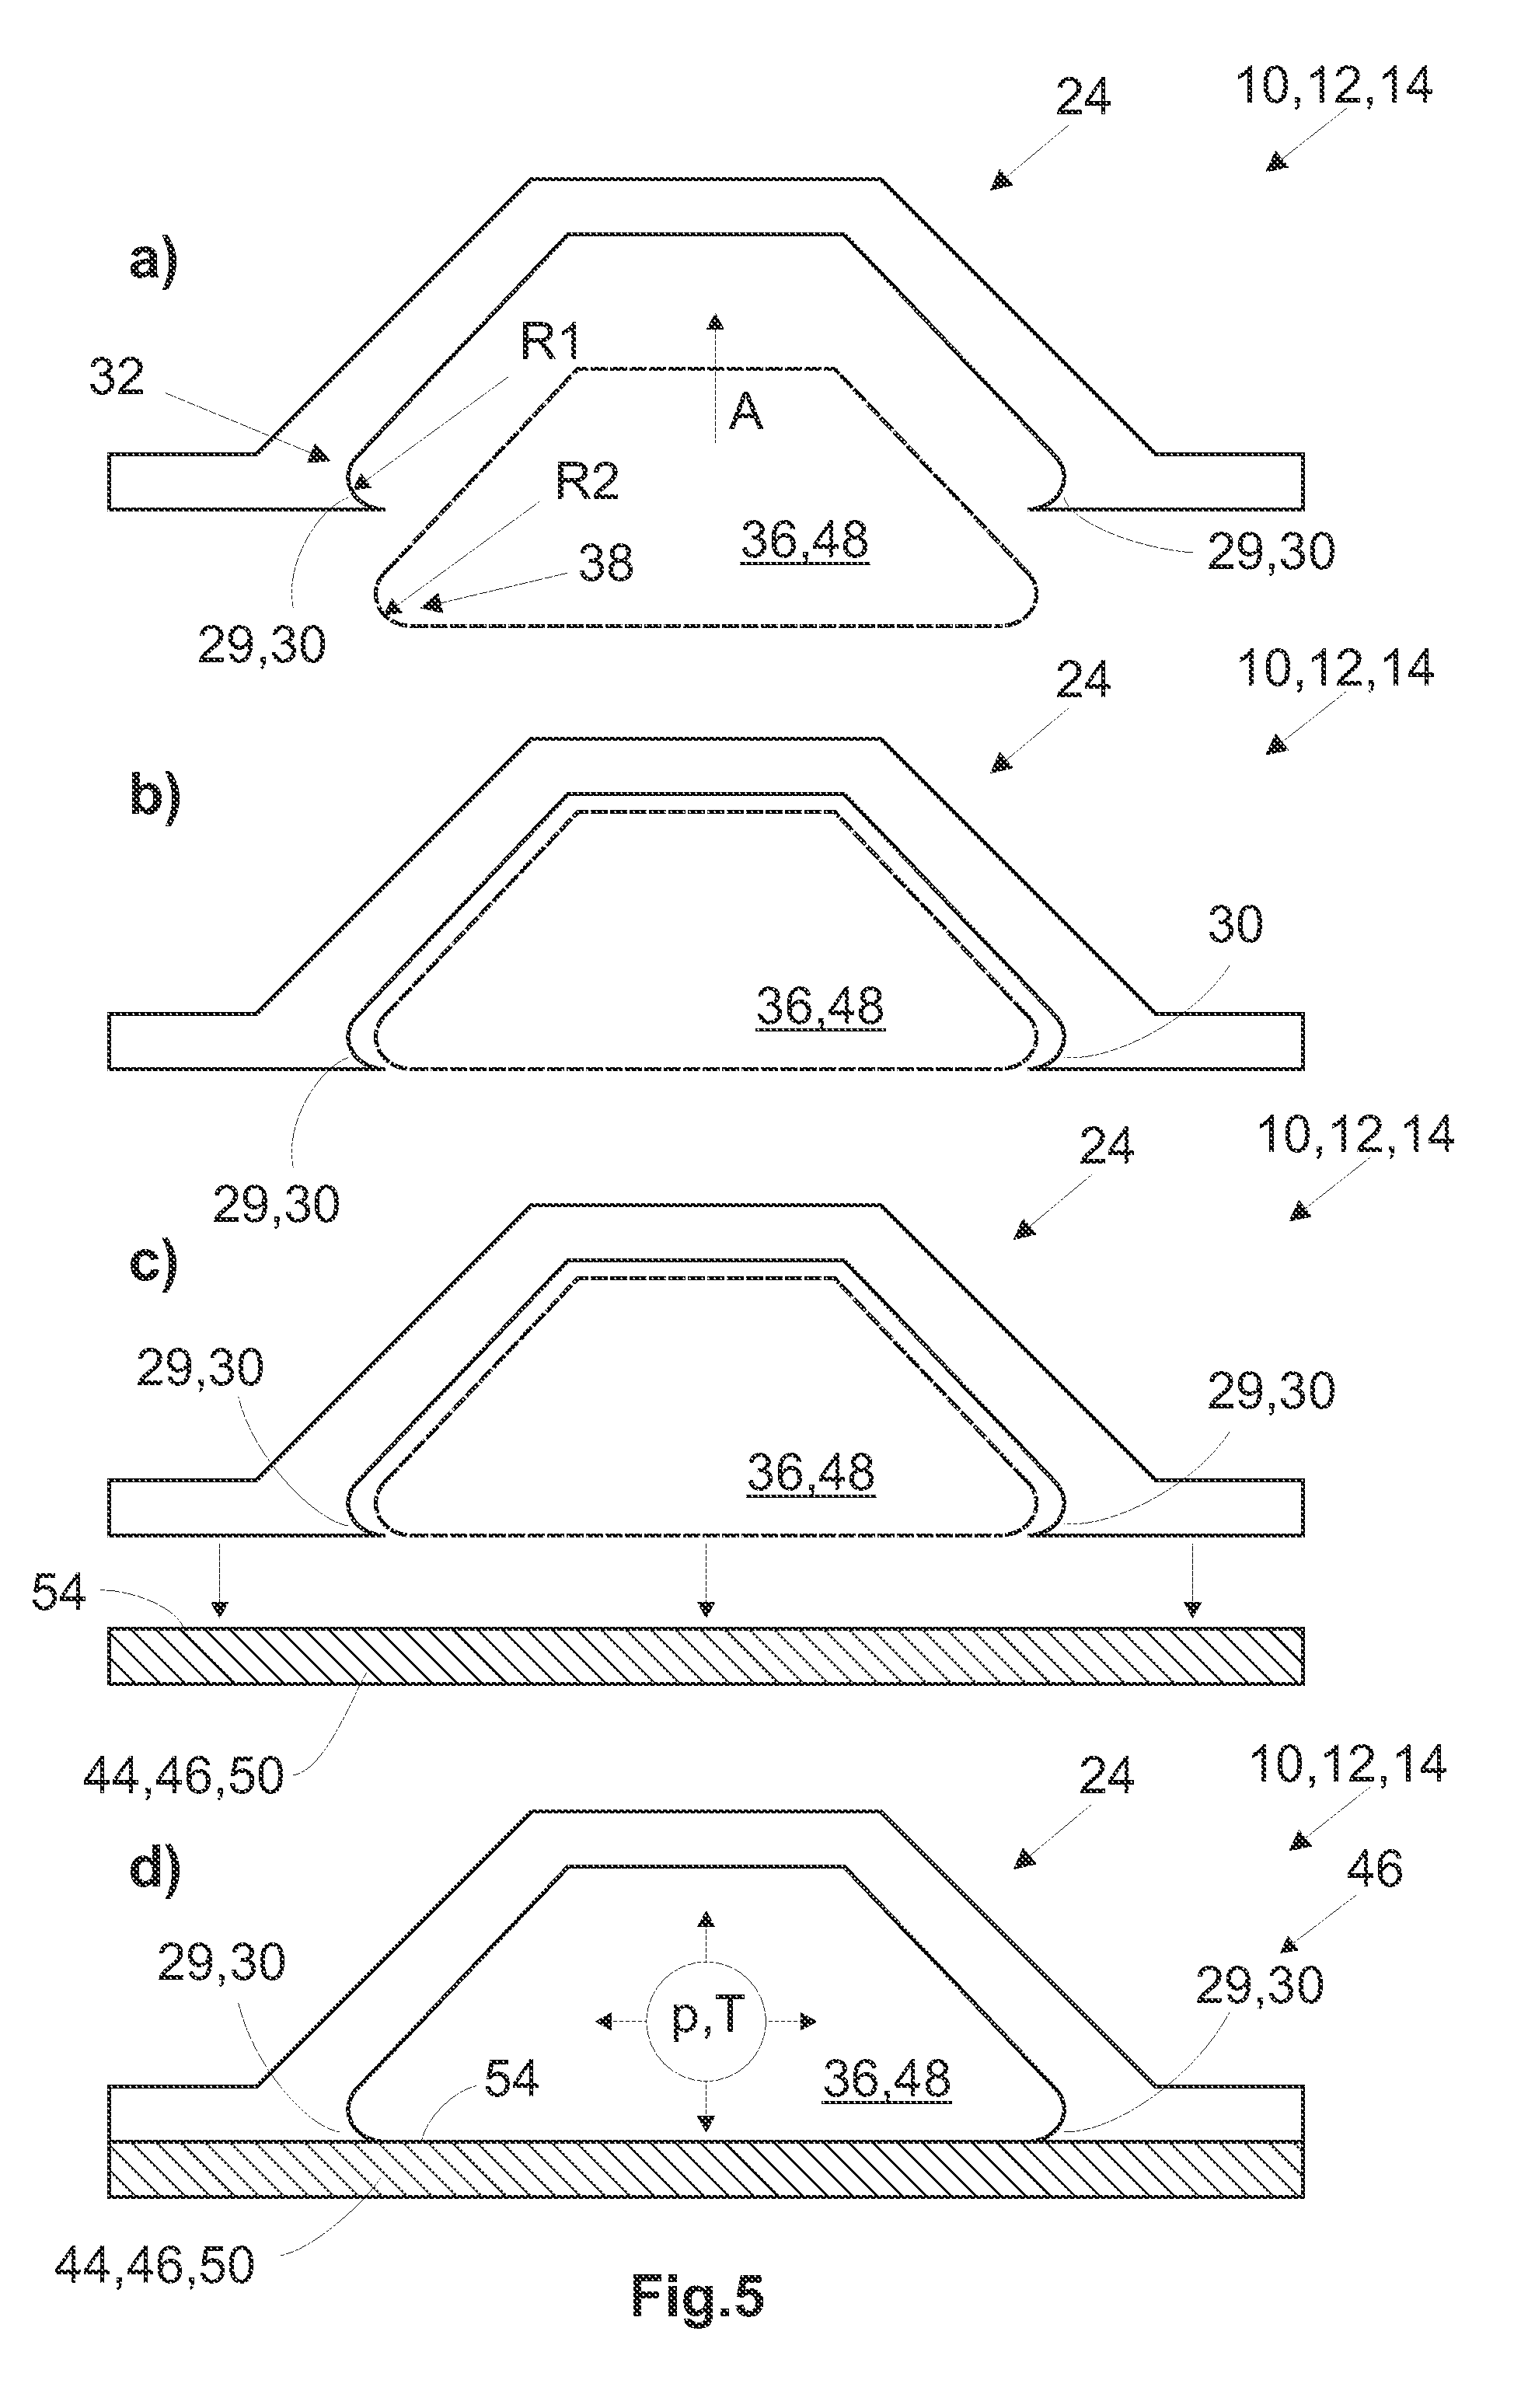 Clip Integration of Pressure Tube Mold Cores into Hardened Omega-Stringers for the Production of Stiffened Fiber Composite Skin Shells, in particular for Aeronautics and Astronautics